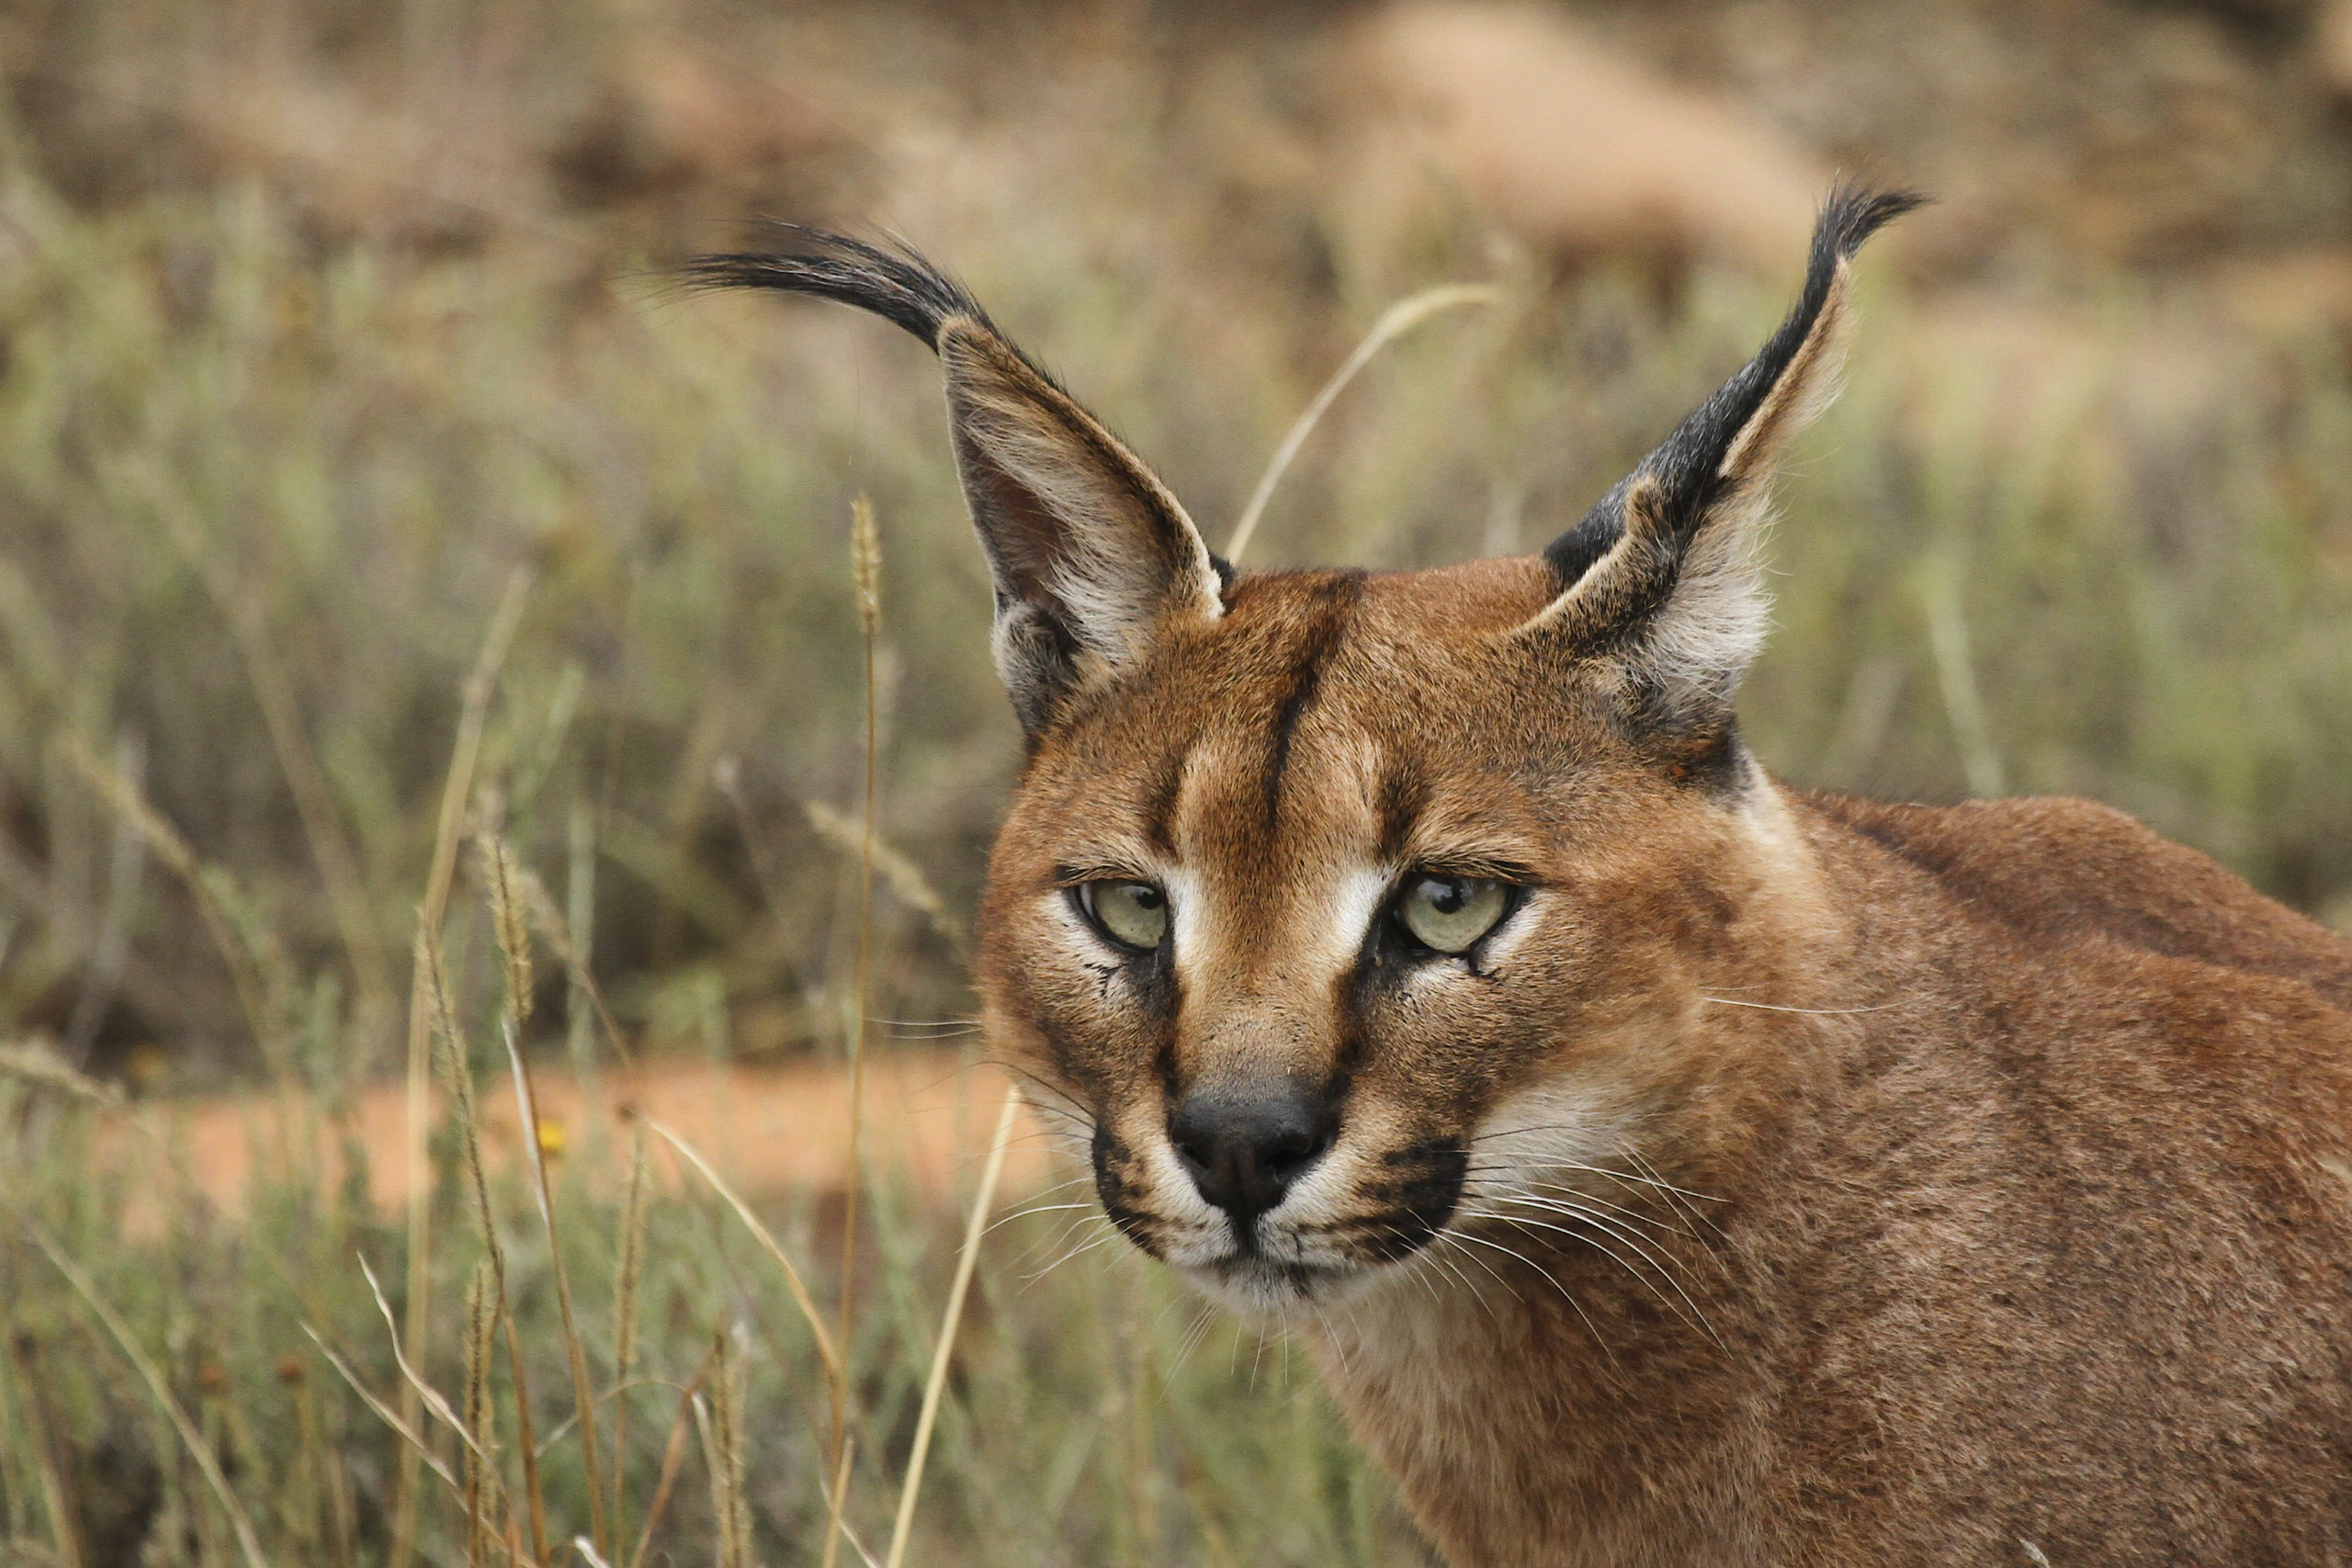 18 to 35 Caracals found in Ranthambore National Park - India's Endangered